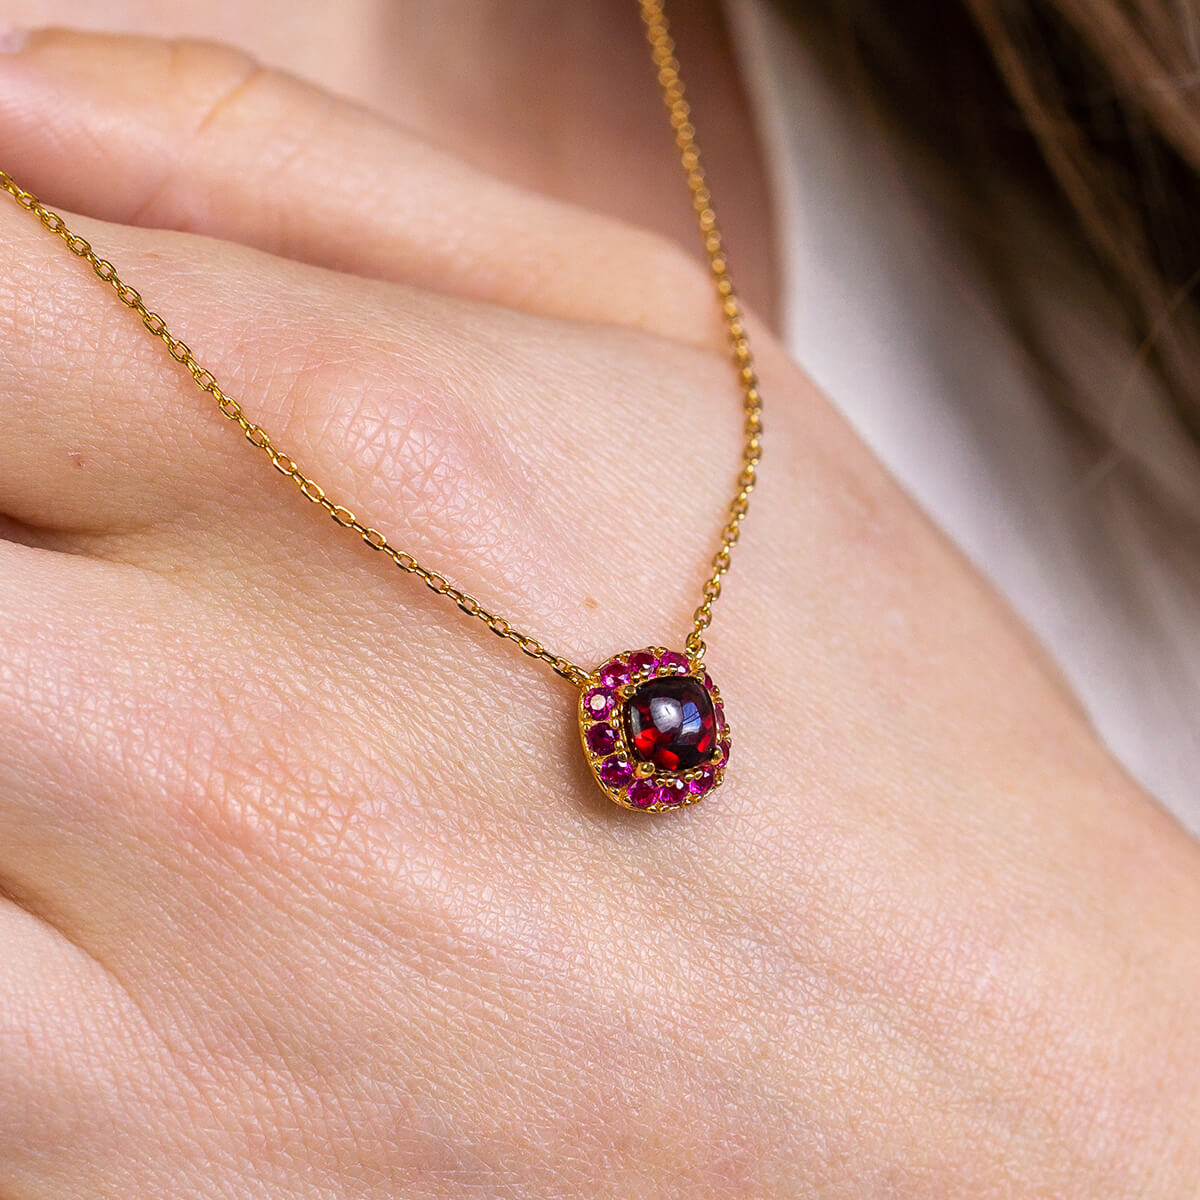 DEVOTION Garnet and Ruby Necklace